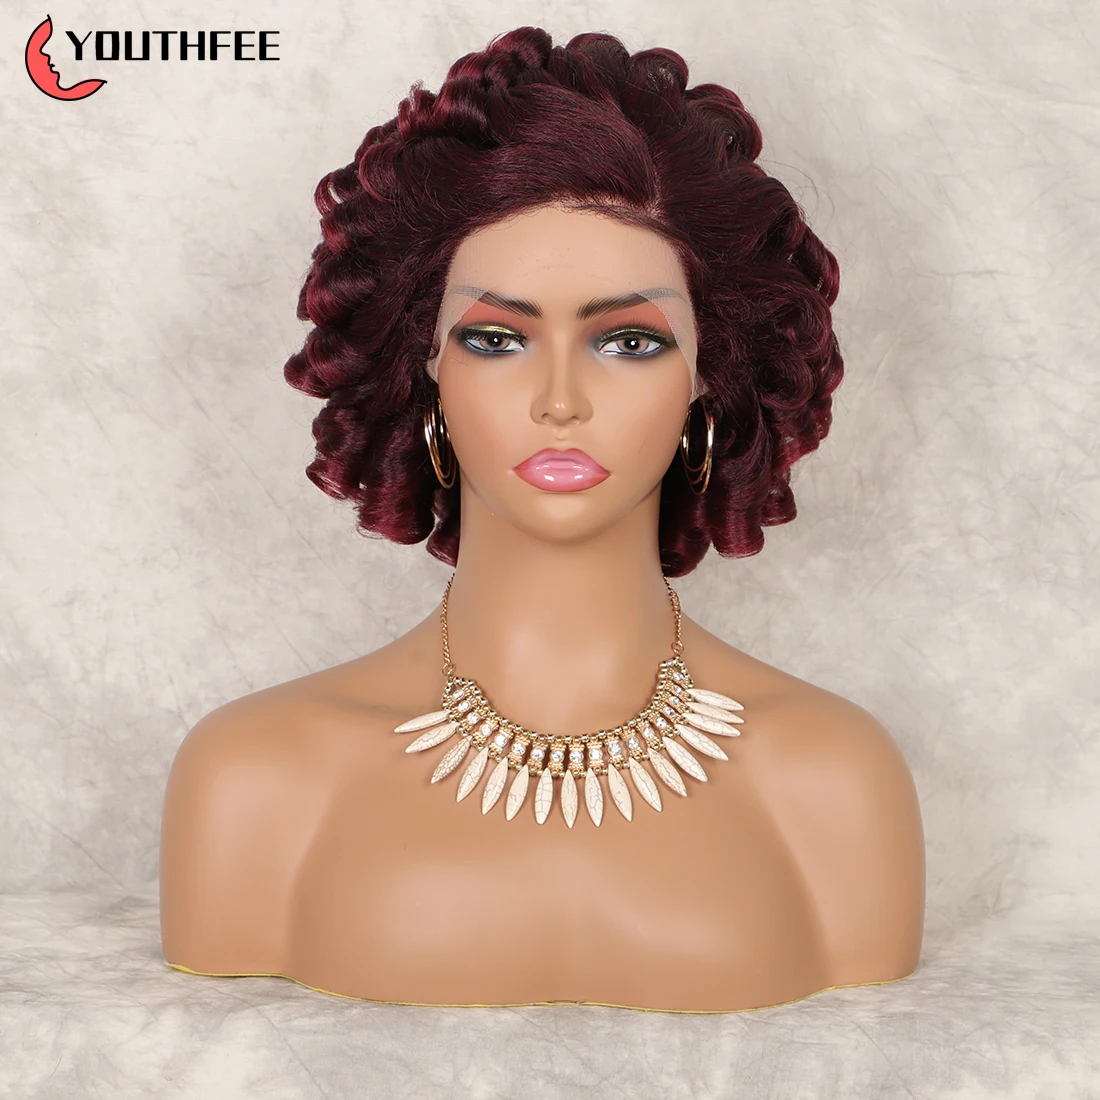 

Youthfee Curly Lace Front Wigs 12" Burgundy Spring Curls Wig With Baby Hair For Women Deep Wave Curly Synthetic Wigs